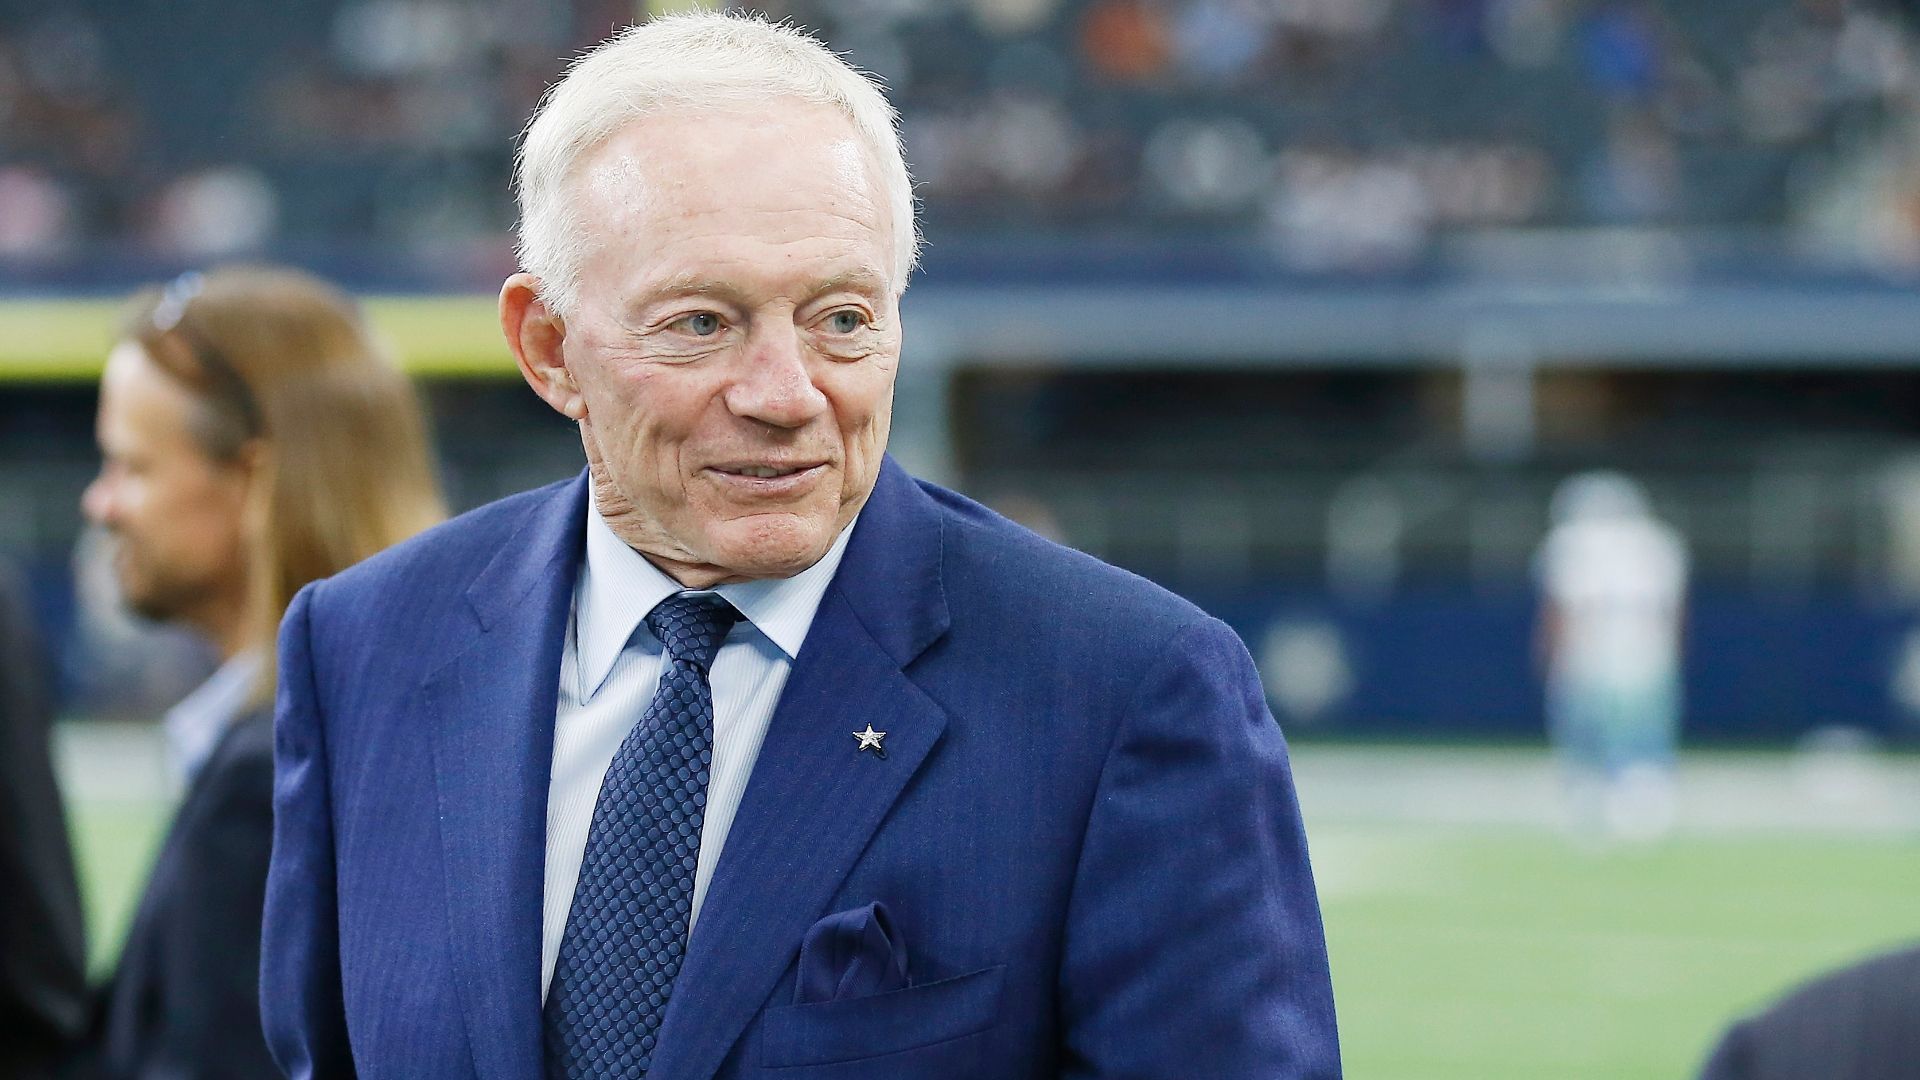 Greeny: No owner should repeat what Jerry Jones said